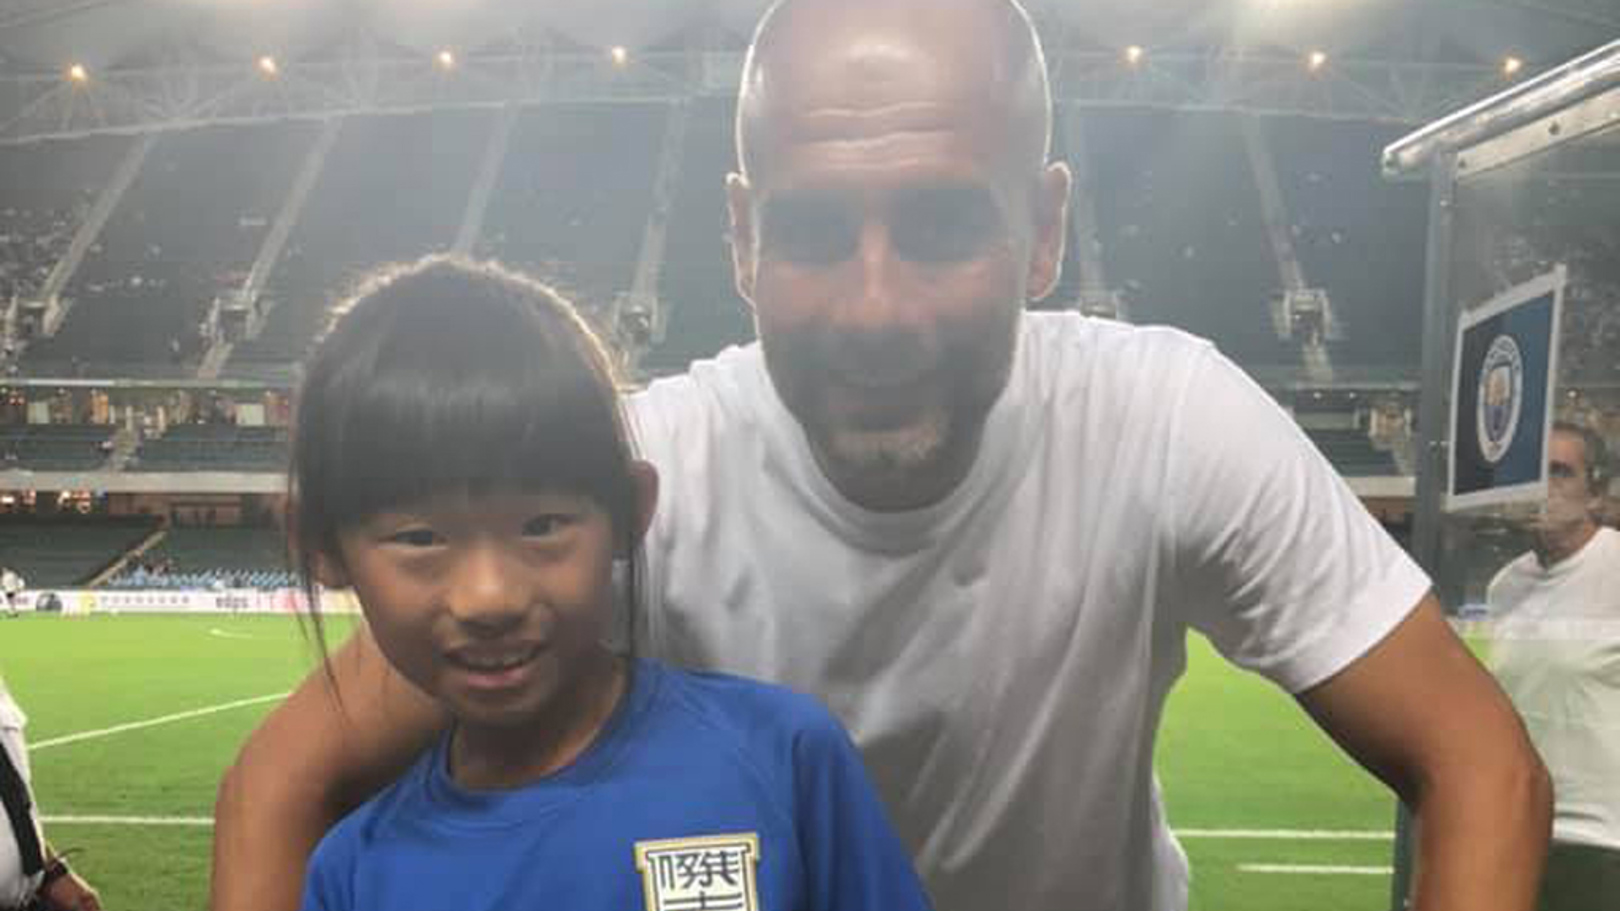 FUTURE STAR?: Jane met Pep Guardiola after watching Kitchee v City